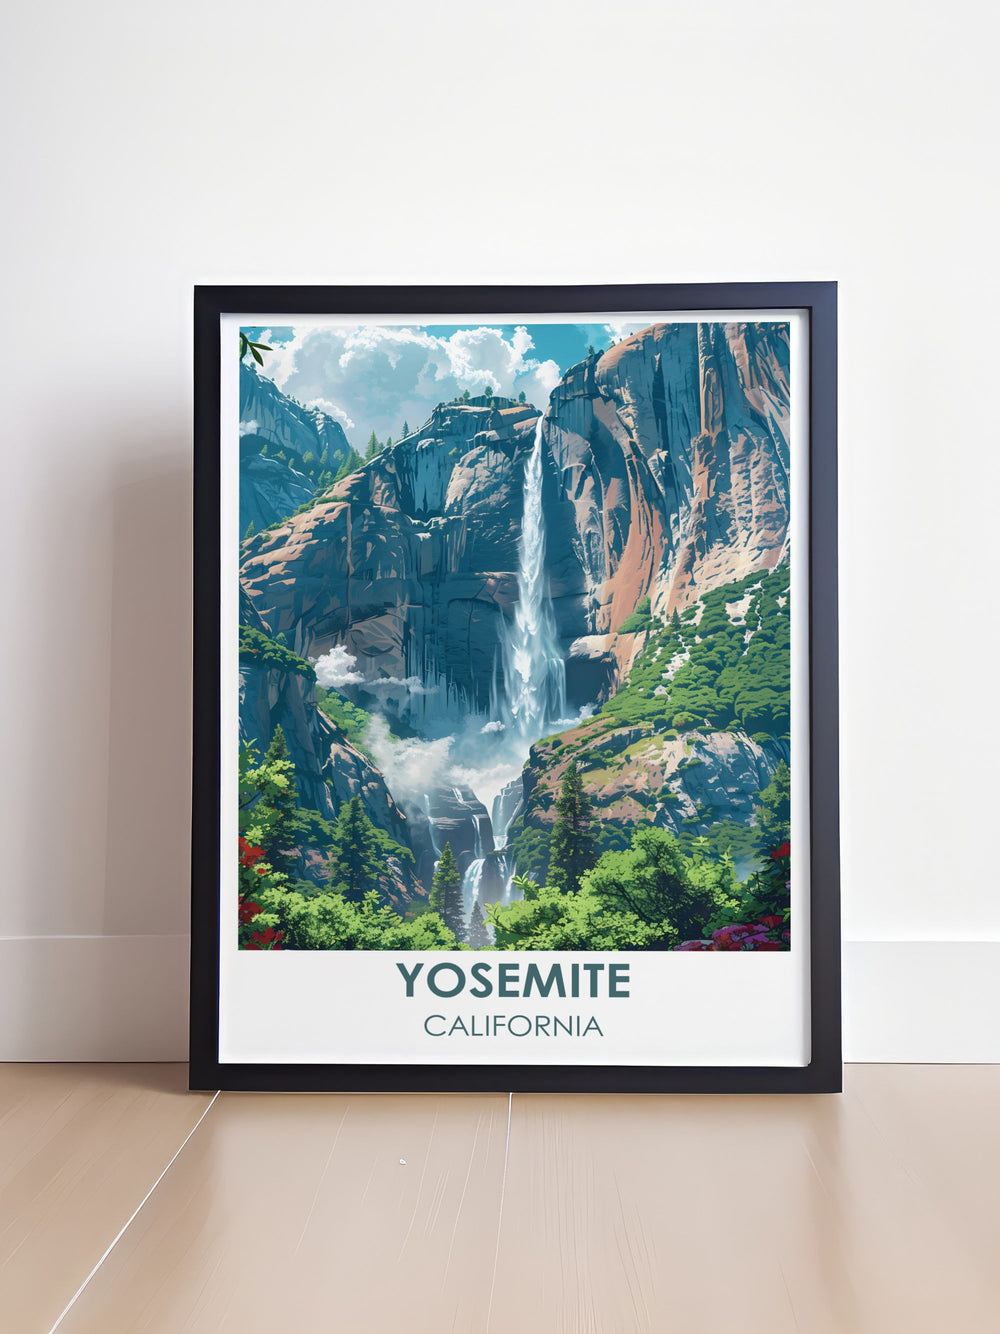 Yosemite Falls, one of the tallest waterfalls in North America, is beautifully illustrated in this poster, showcasing the thundering cascades and misty rainbows that make it a breathtaking natural wonder.